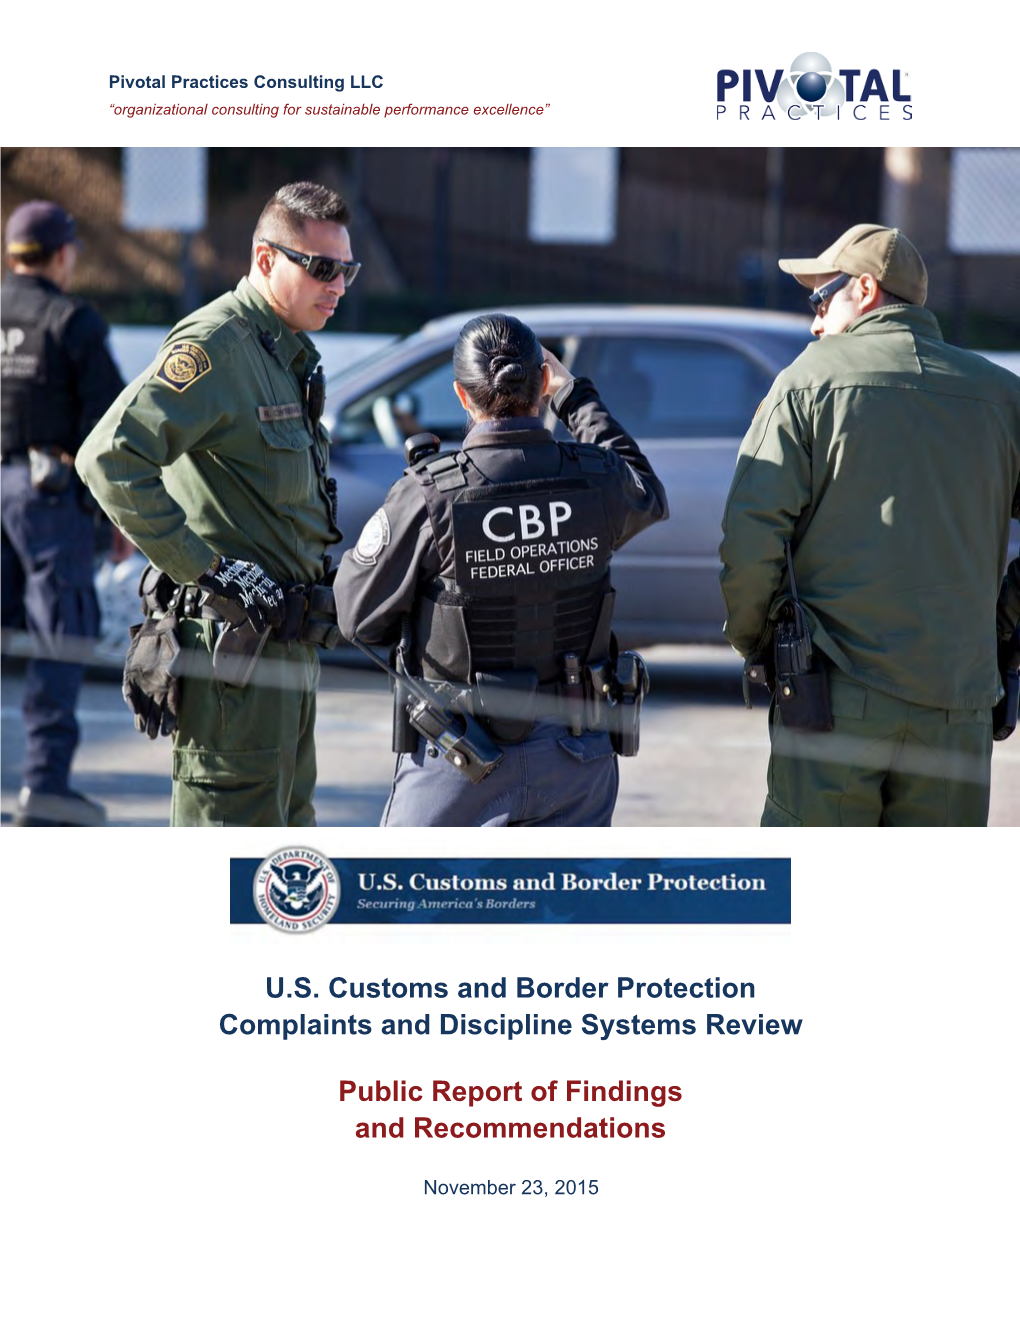 U.S. Customs and Border Protection Complaints and Discipline Systems Review Public Report of Findings and Recommendations